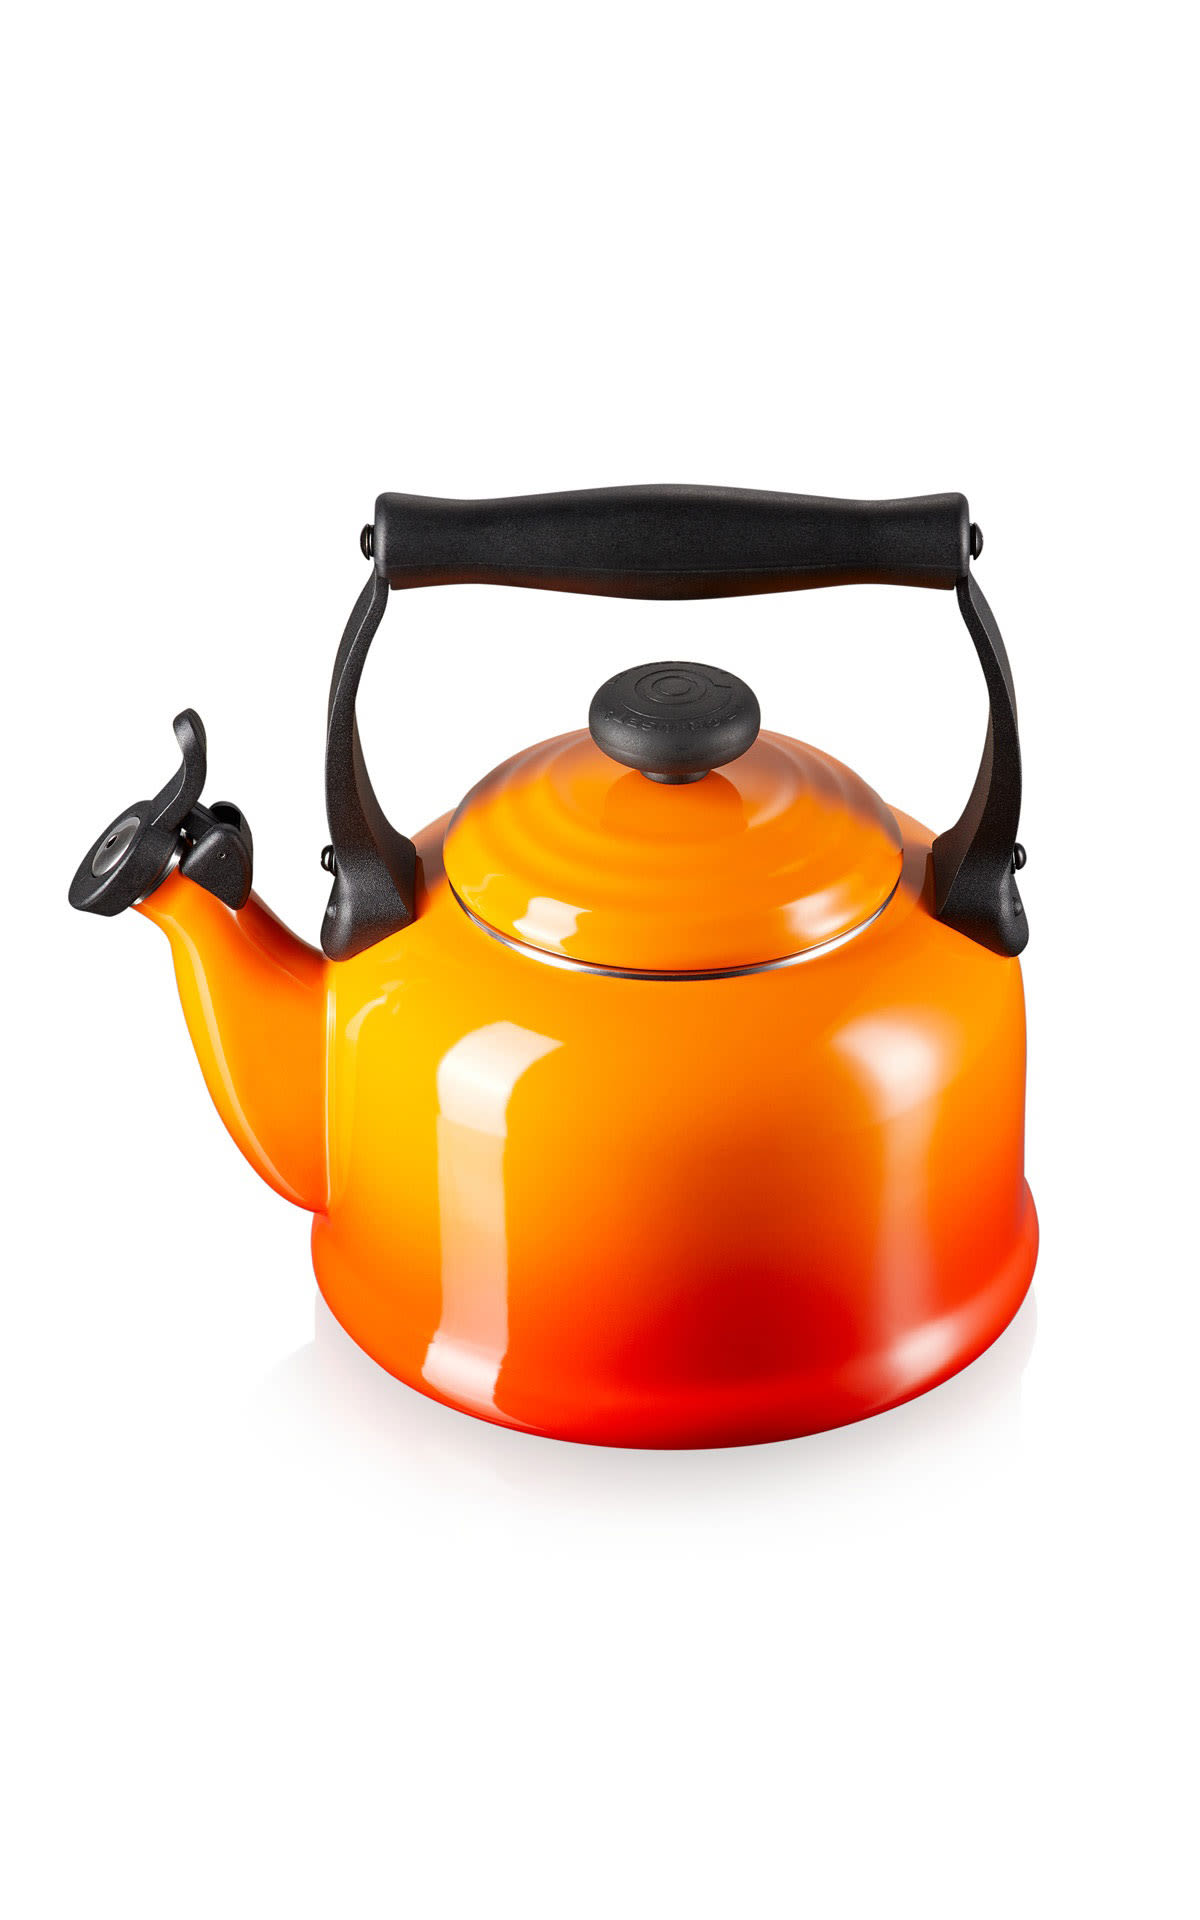 Le Creuset Traditional kettle from Bicester Village